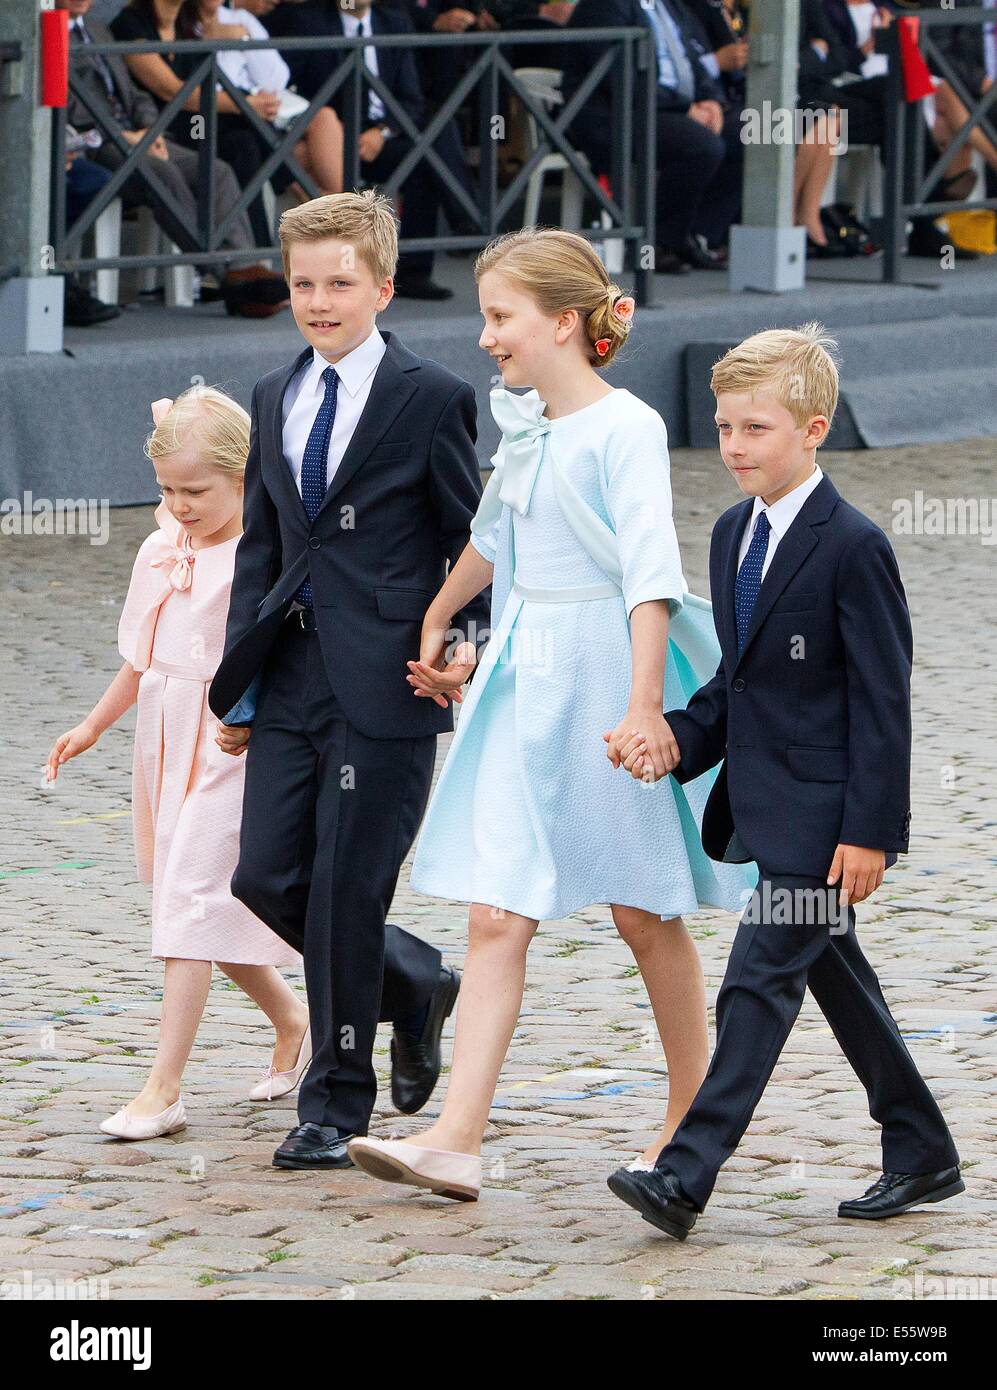 (L-R) Princess Eleonore, Prince Gabriel, Crown Princess Elisabeth and Prince Emmanuel of Belgium during the National Day celebrations in Brussels (Belgium), 21 July 2014. Photo: RPE/Albert Nieboer// /dpa -NO WIRE SERVICE- Stock Photo